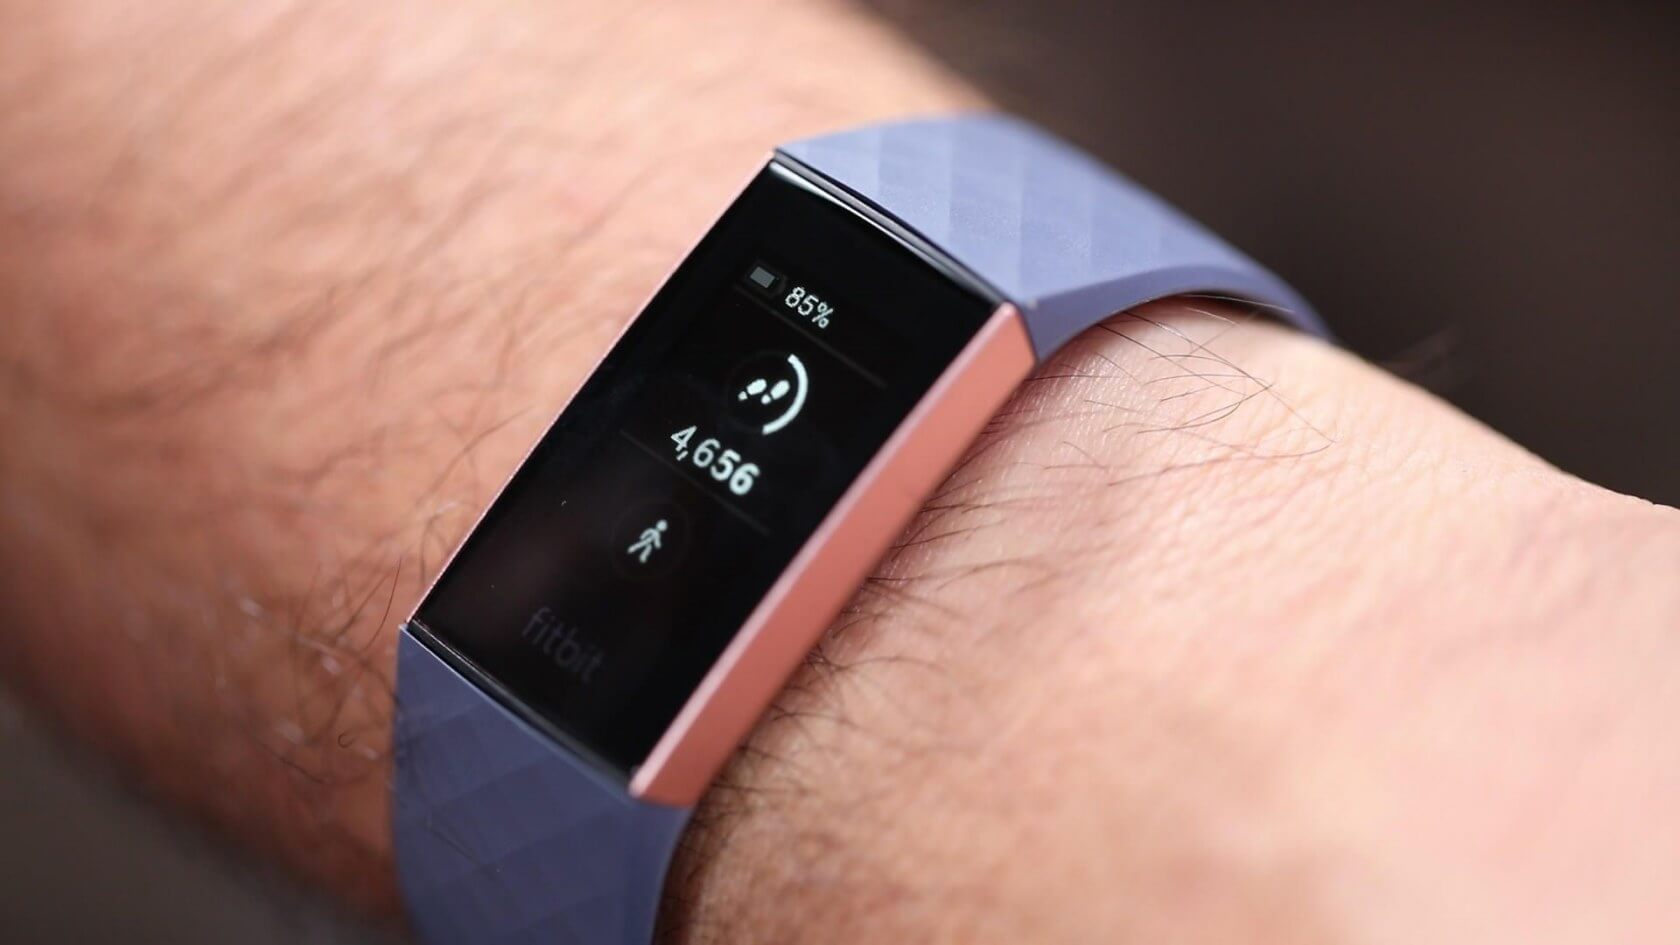 Fitbit's Charge 3 fitness band will launch on October 7 with water resistance and a touchscreen